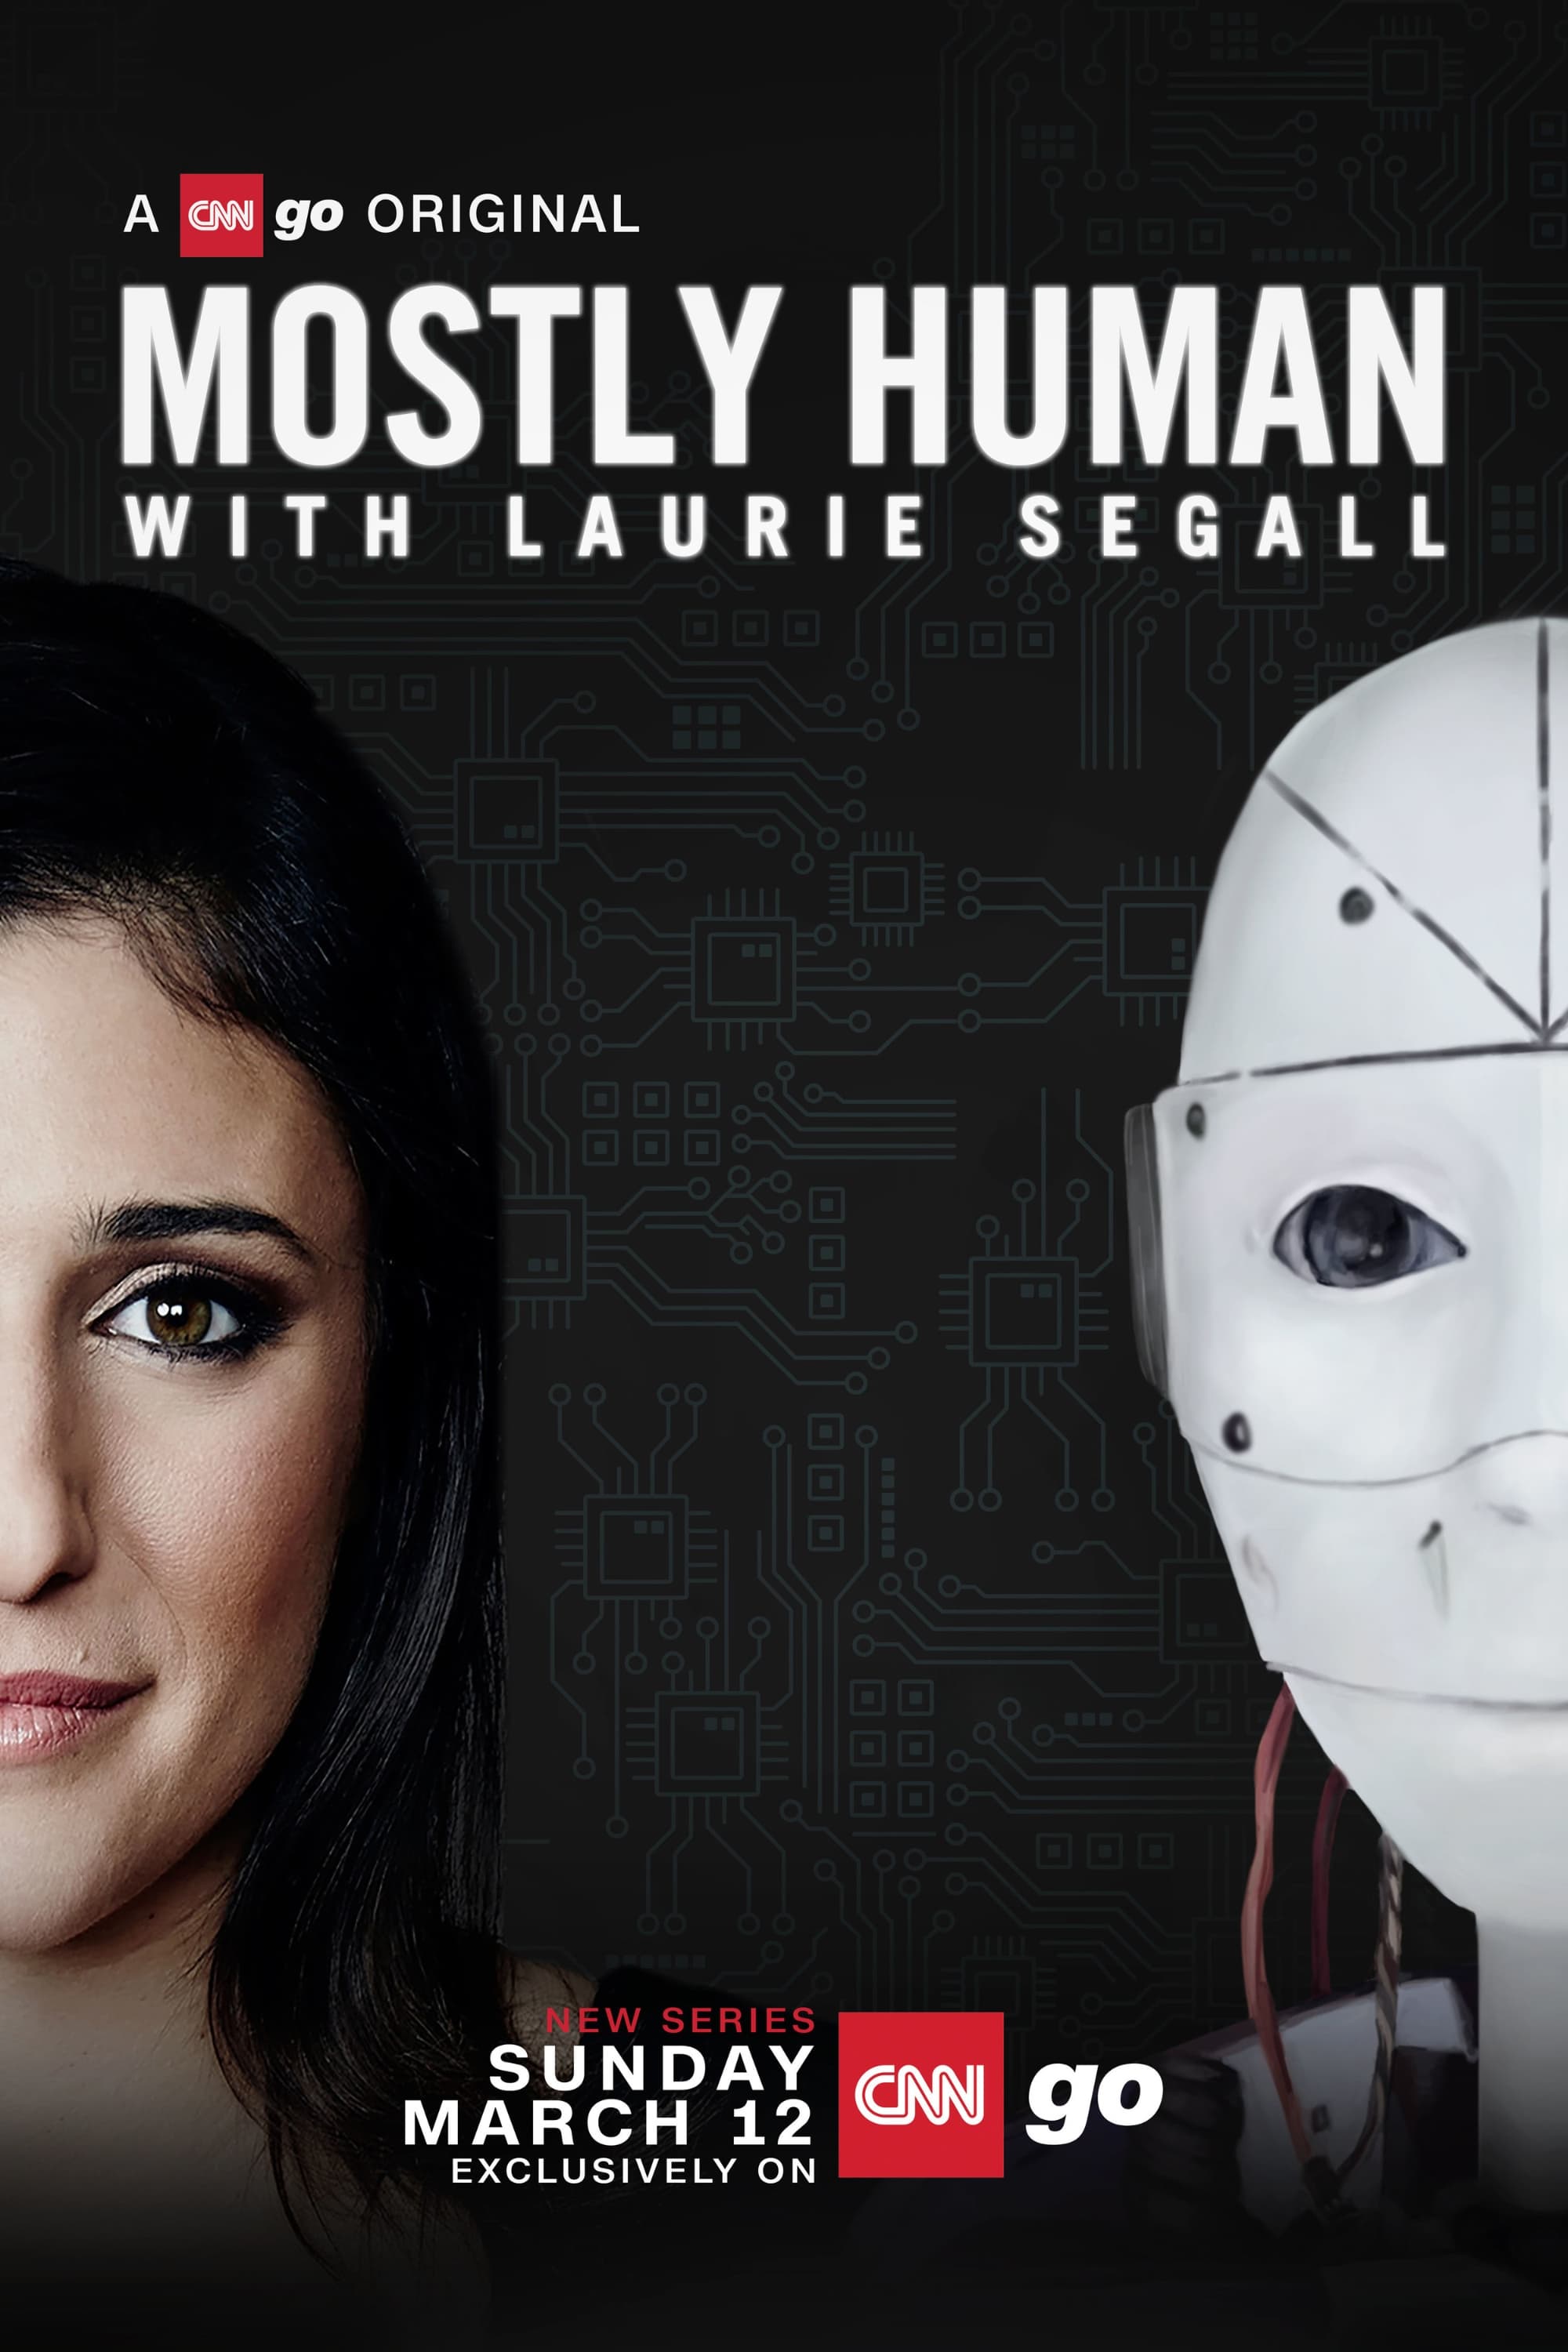 Mostly Human with Laurie Segall